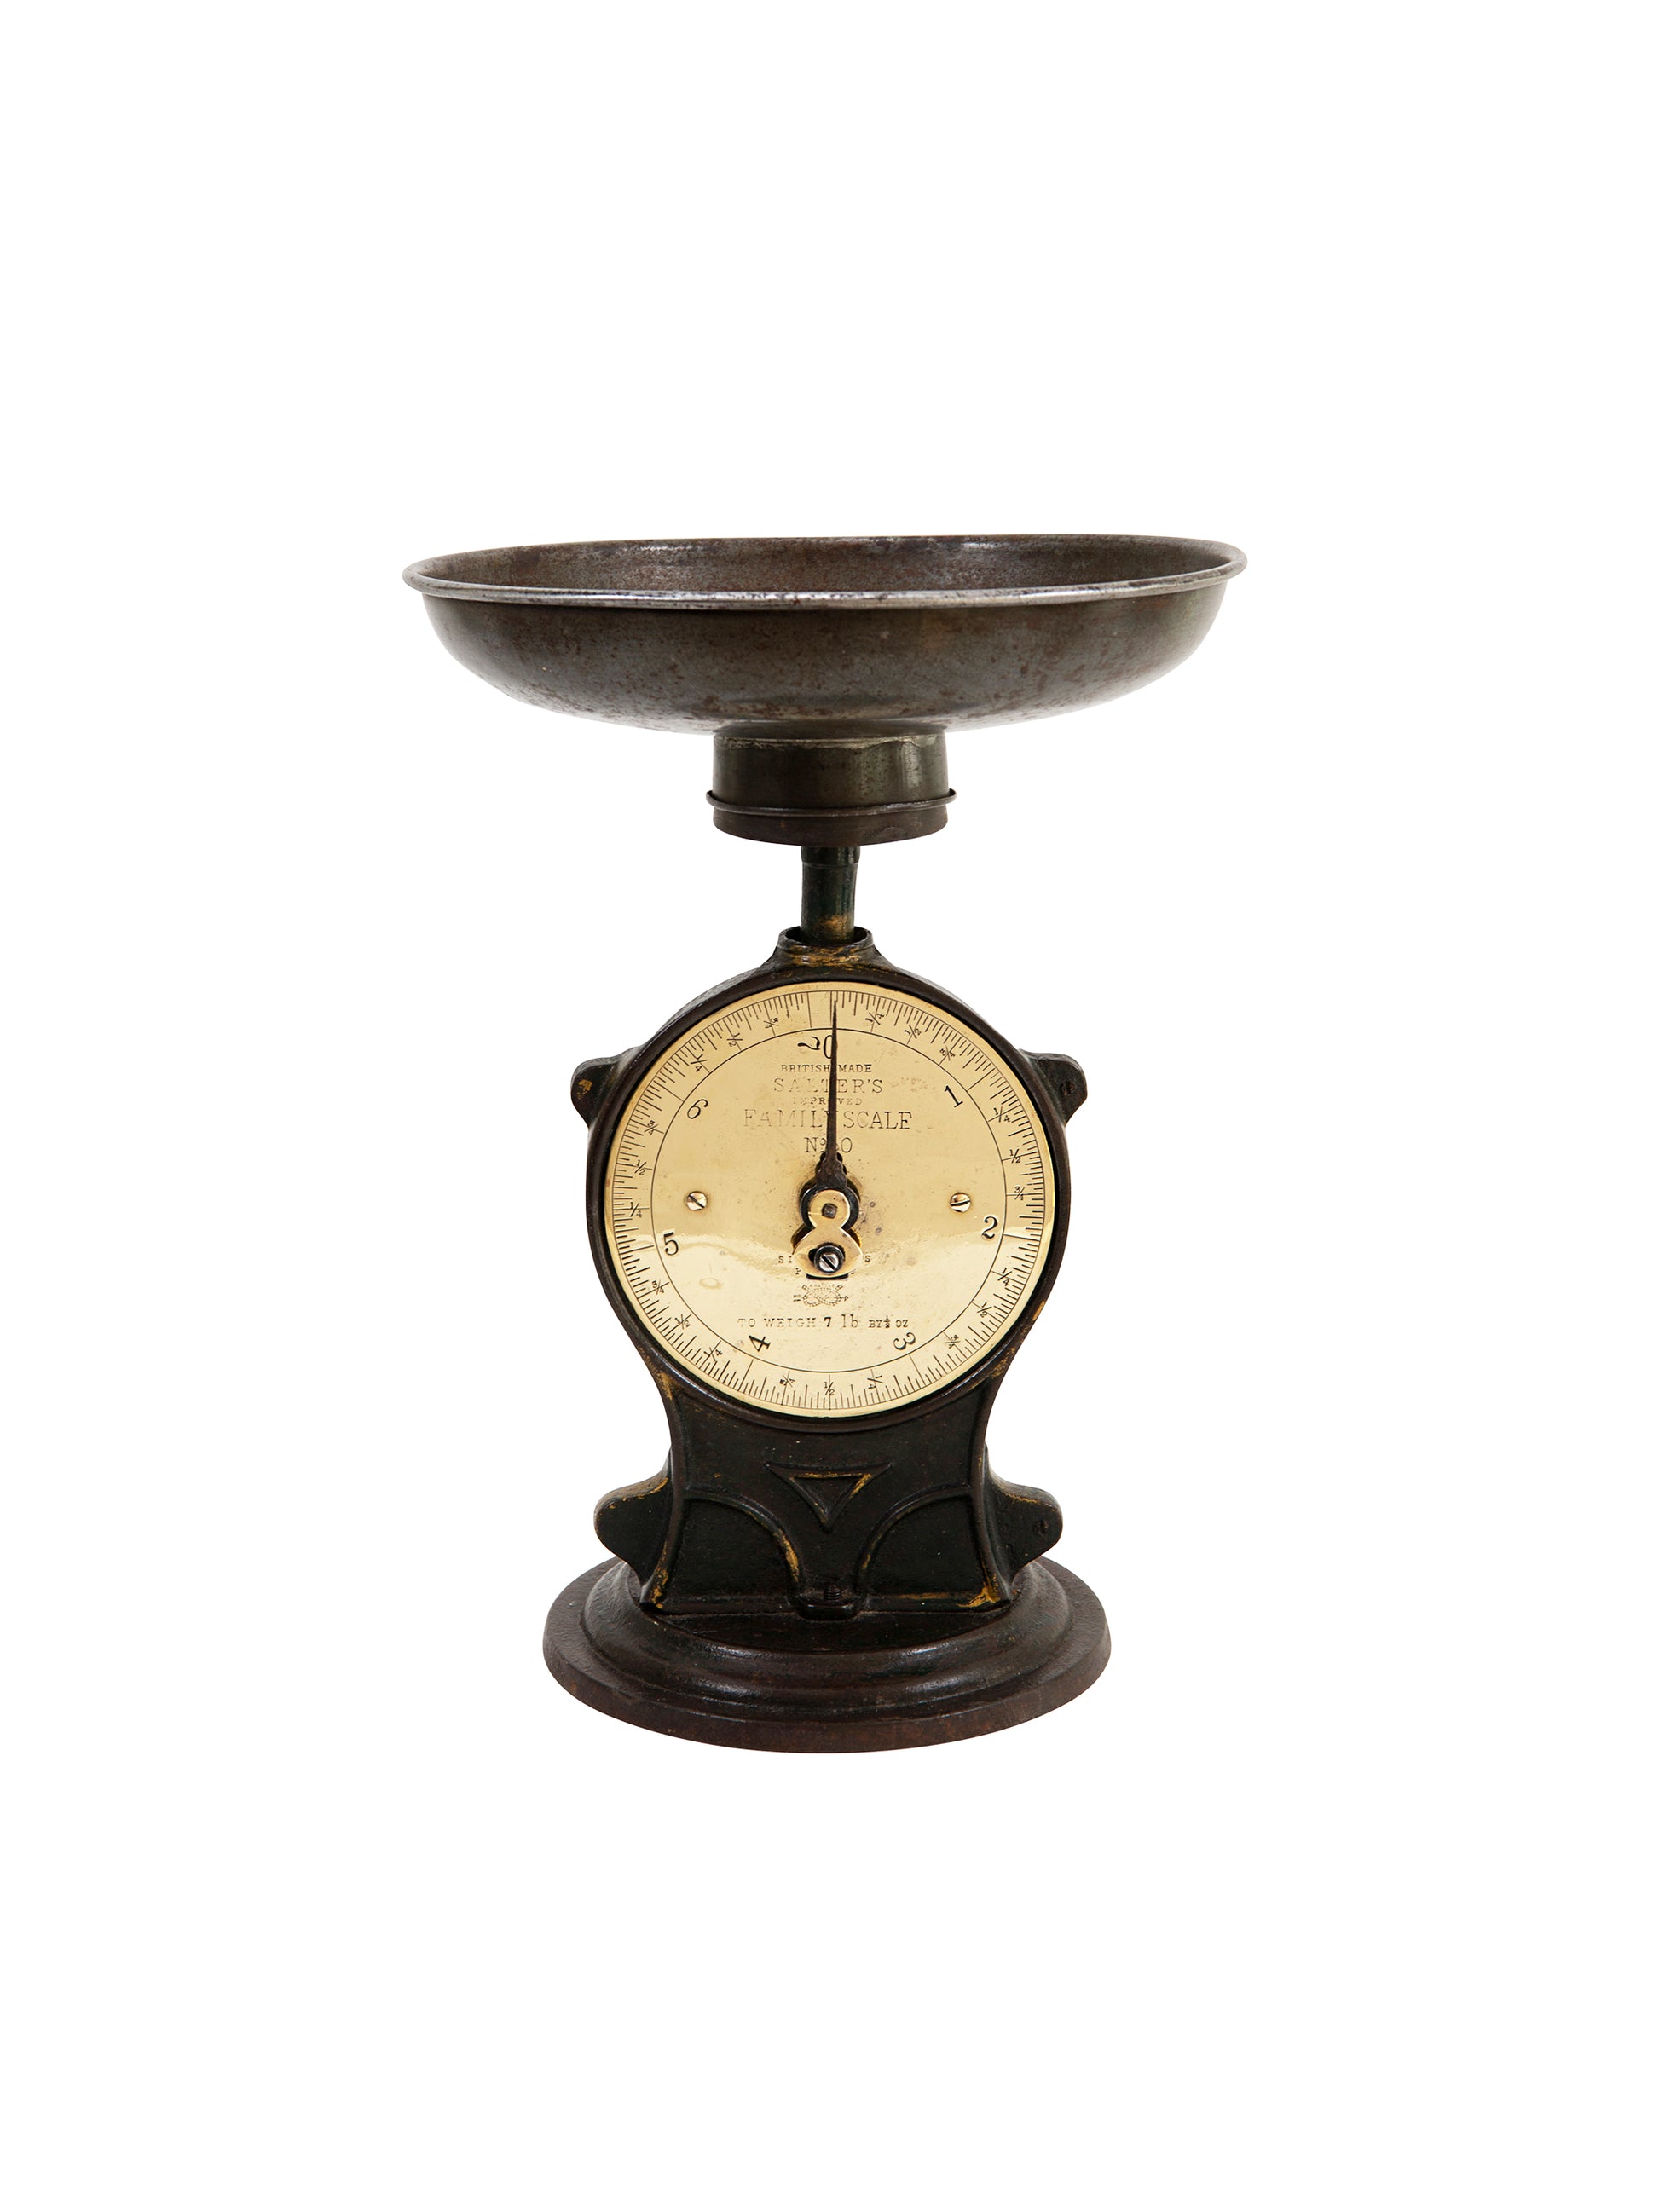 Shop the Vintage 1900s Salter's Family Scale No. 50 at Weston Table